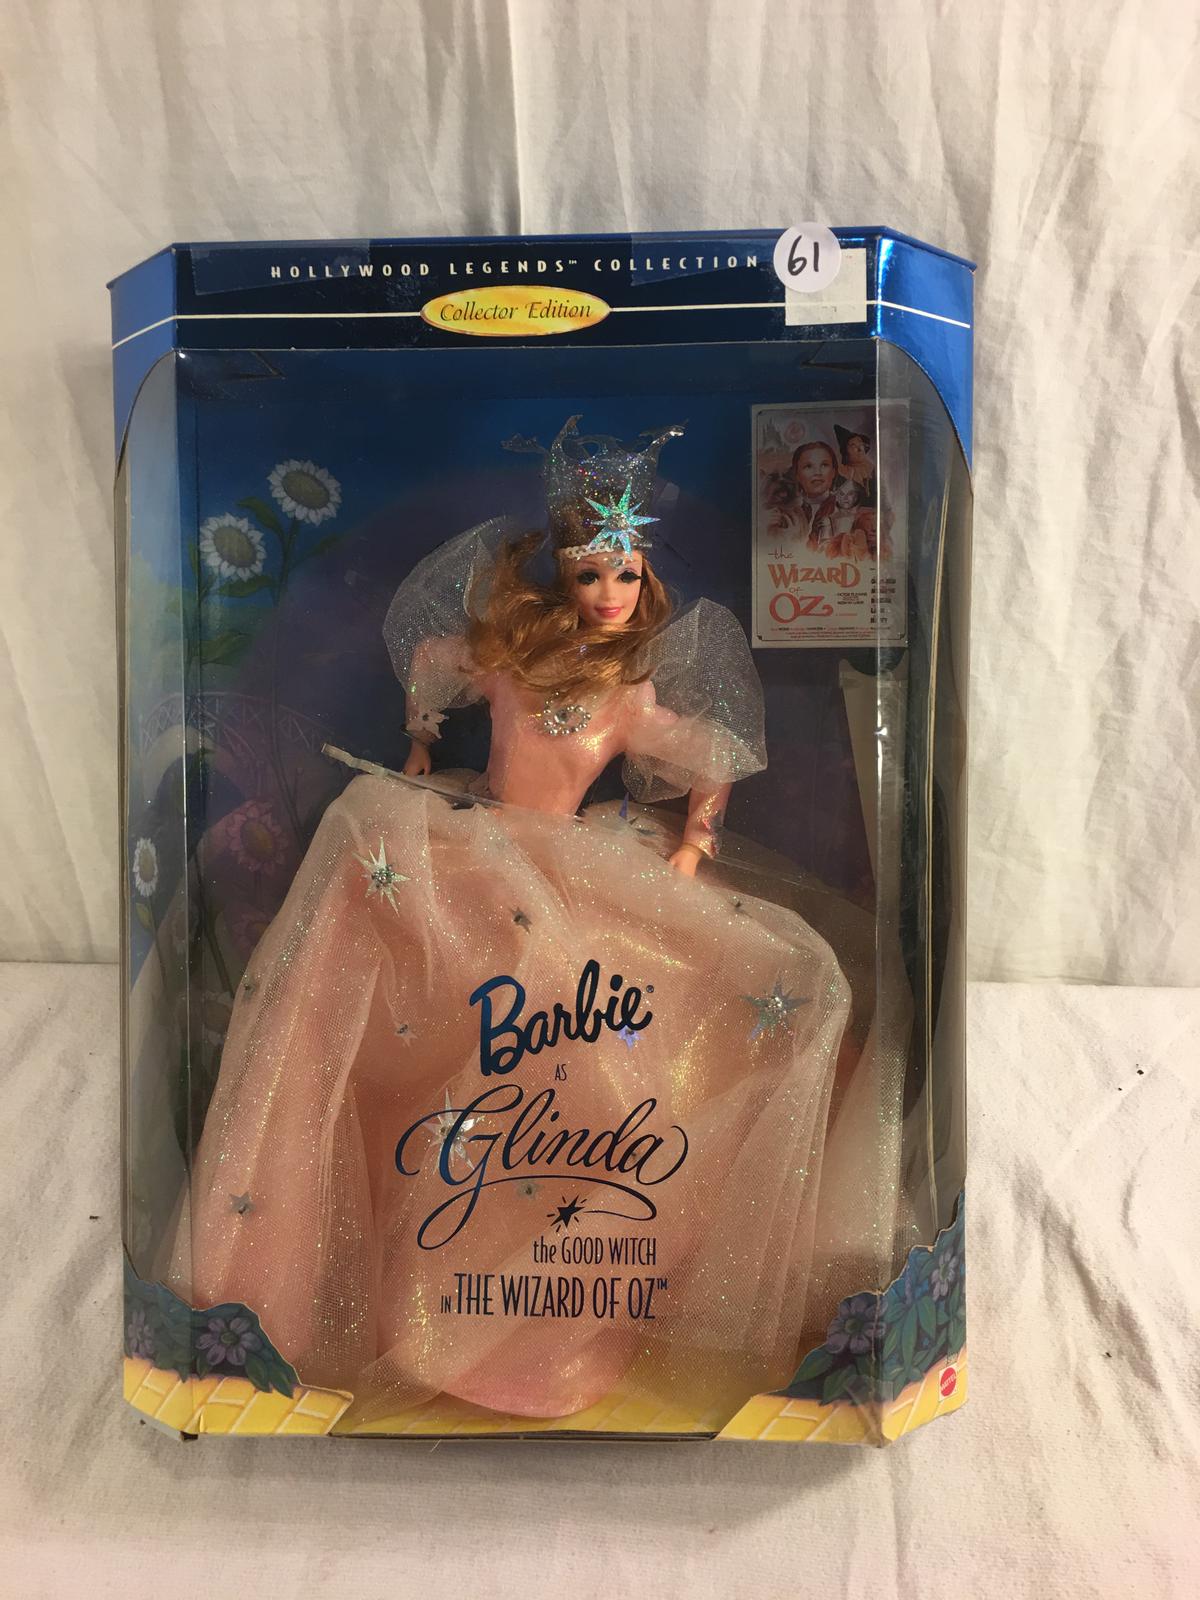 Collector The Wizard of Oz "Glinda The Good Witch" Barbie Doll- Loose in box 14"x10.5"